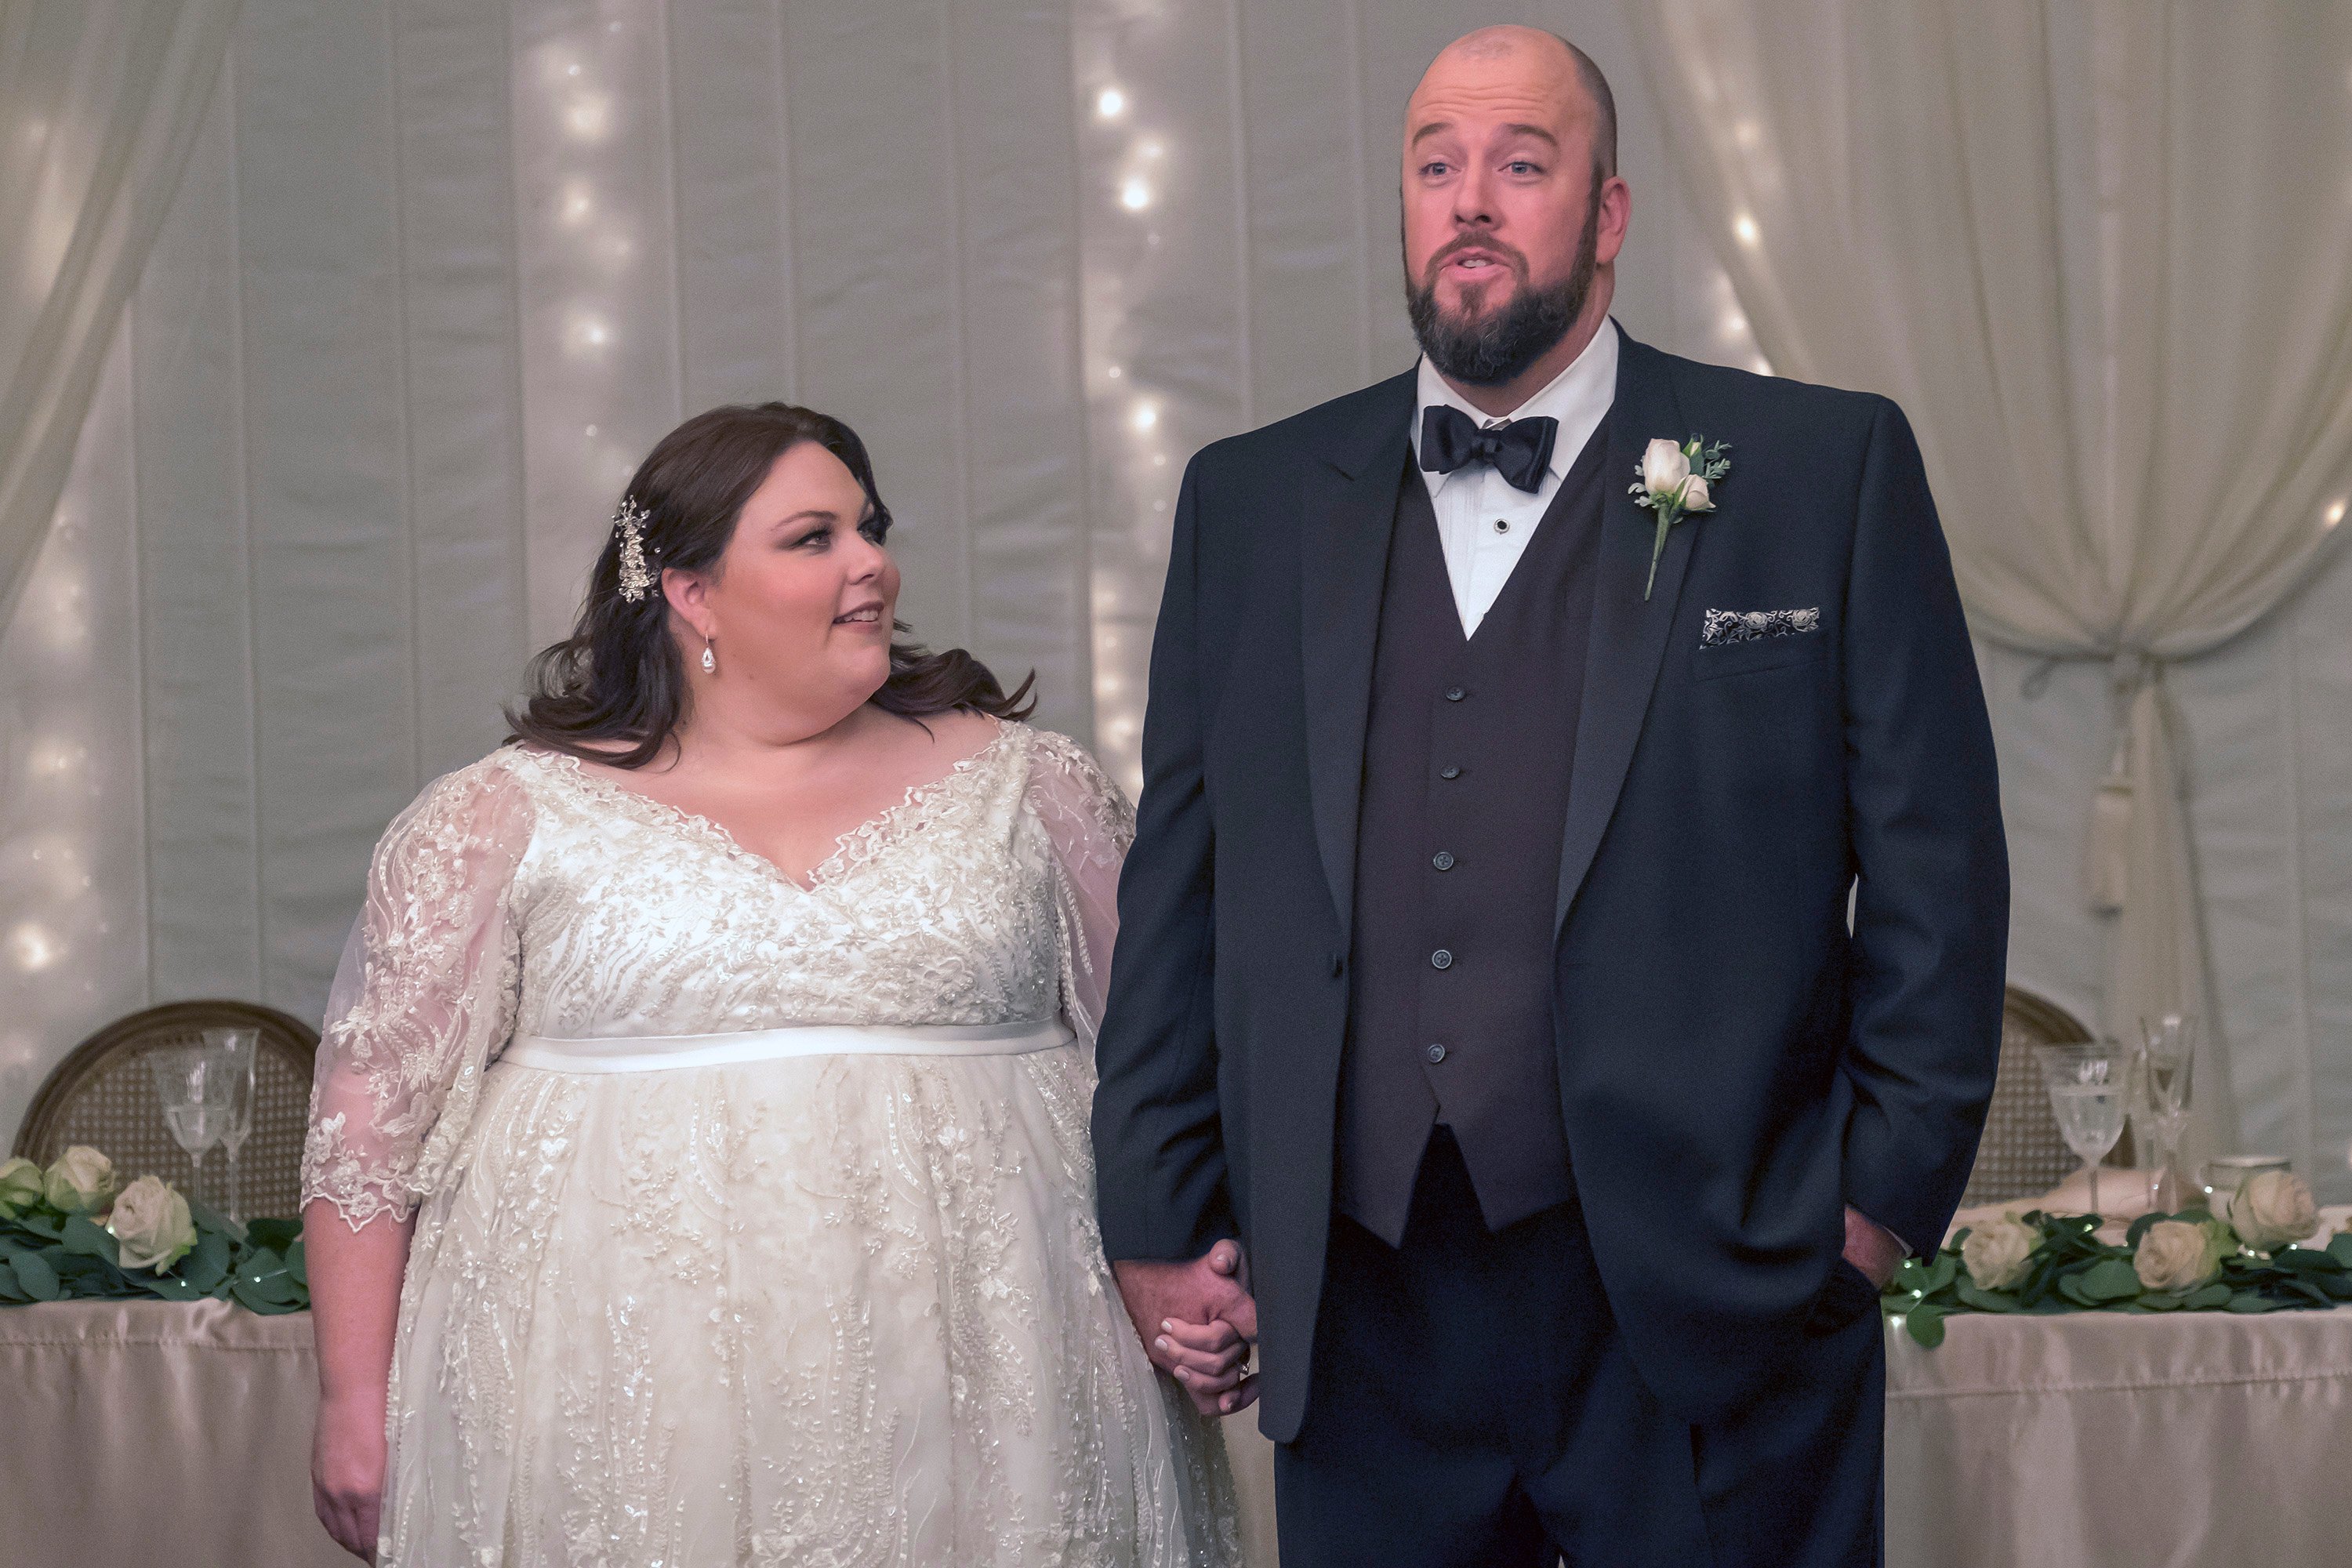 Chrissy Metz as Kate, Chris Sullivan as Toby in 'This Is Us' on NBC